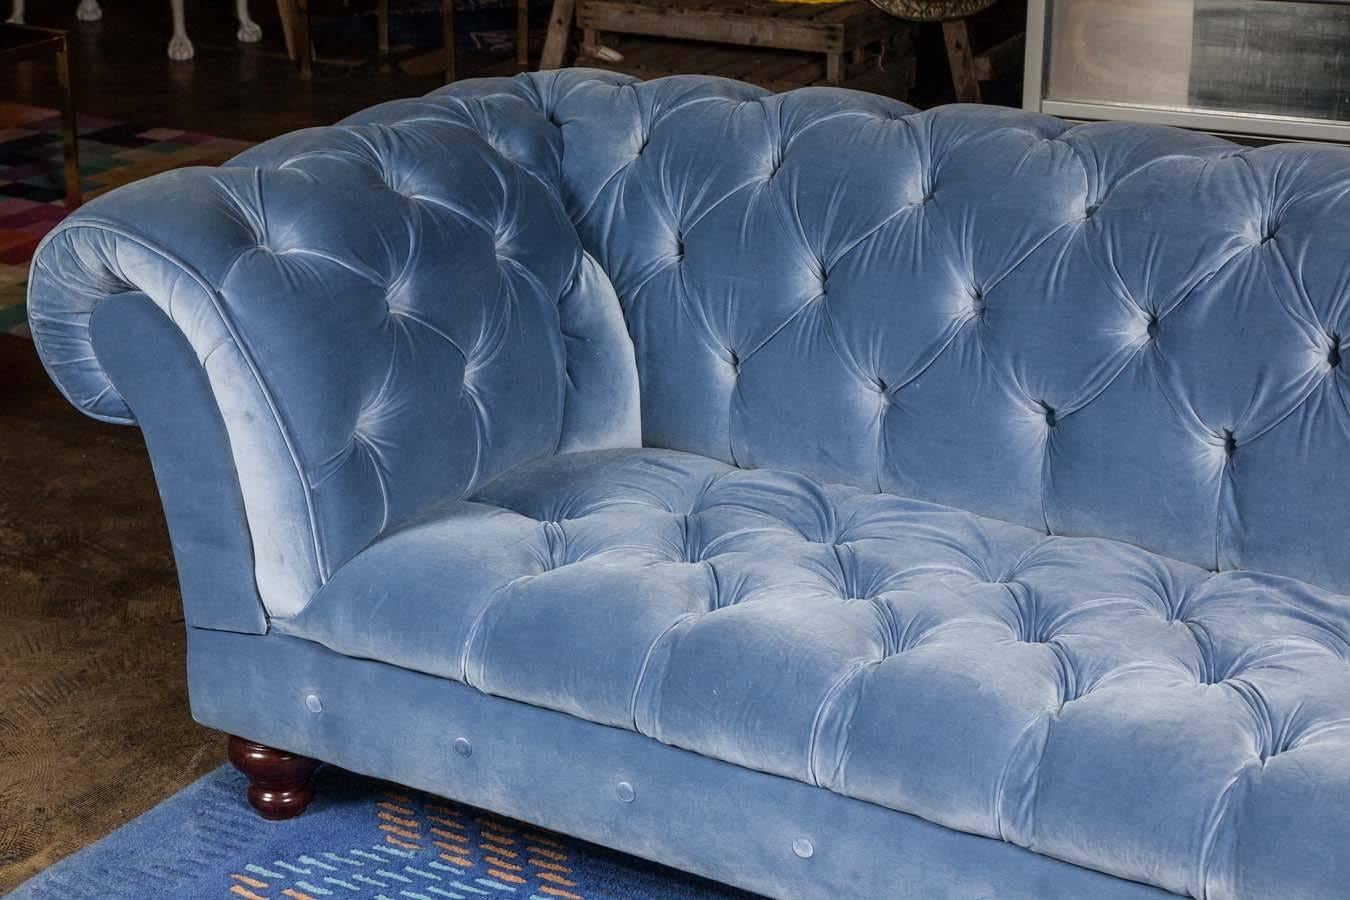 Classic and luxurious our traditional button work Chesterfield sofa is available as part of our bespoke collection and can be made to order in different dimensions and in a range of velvets, wools and leathers. Please contact us for more details.